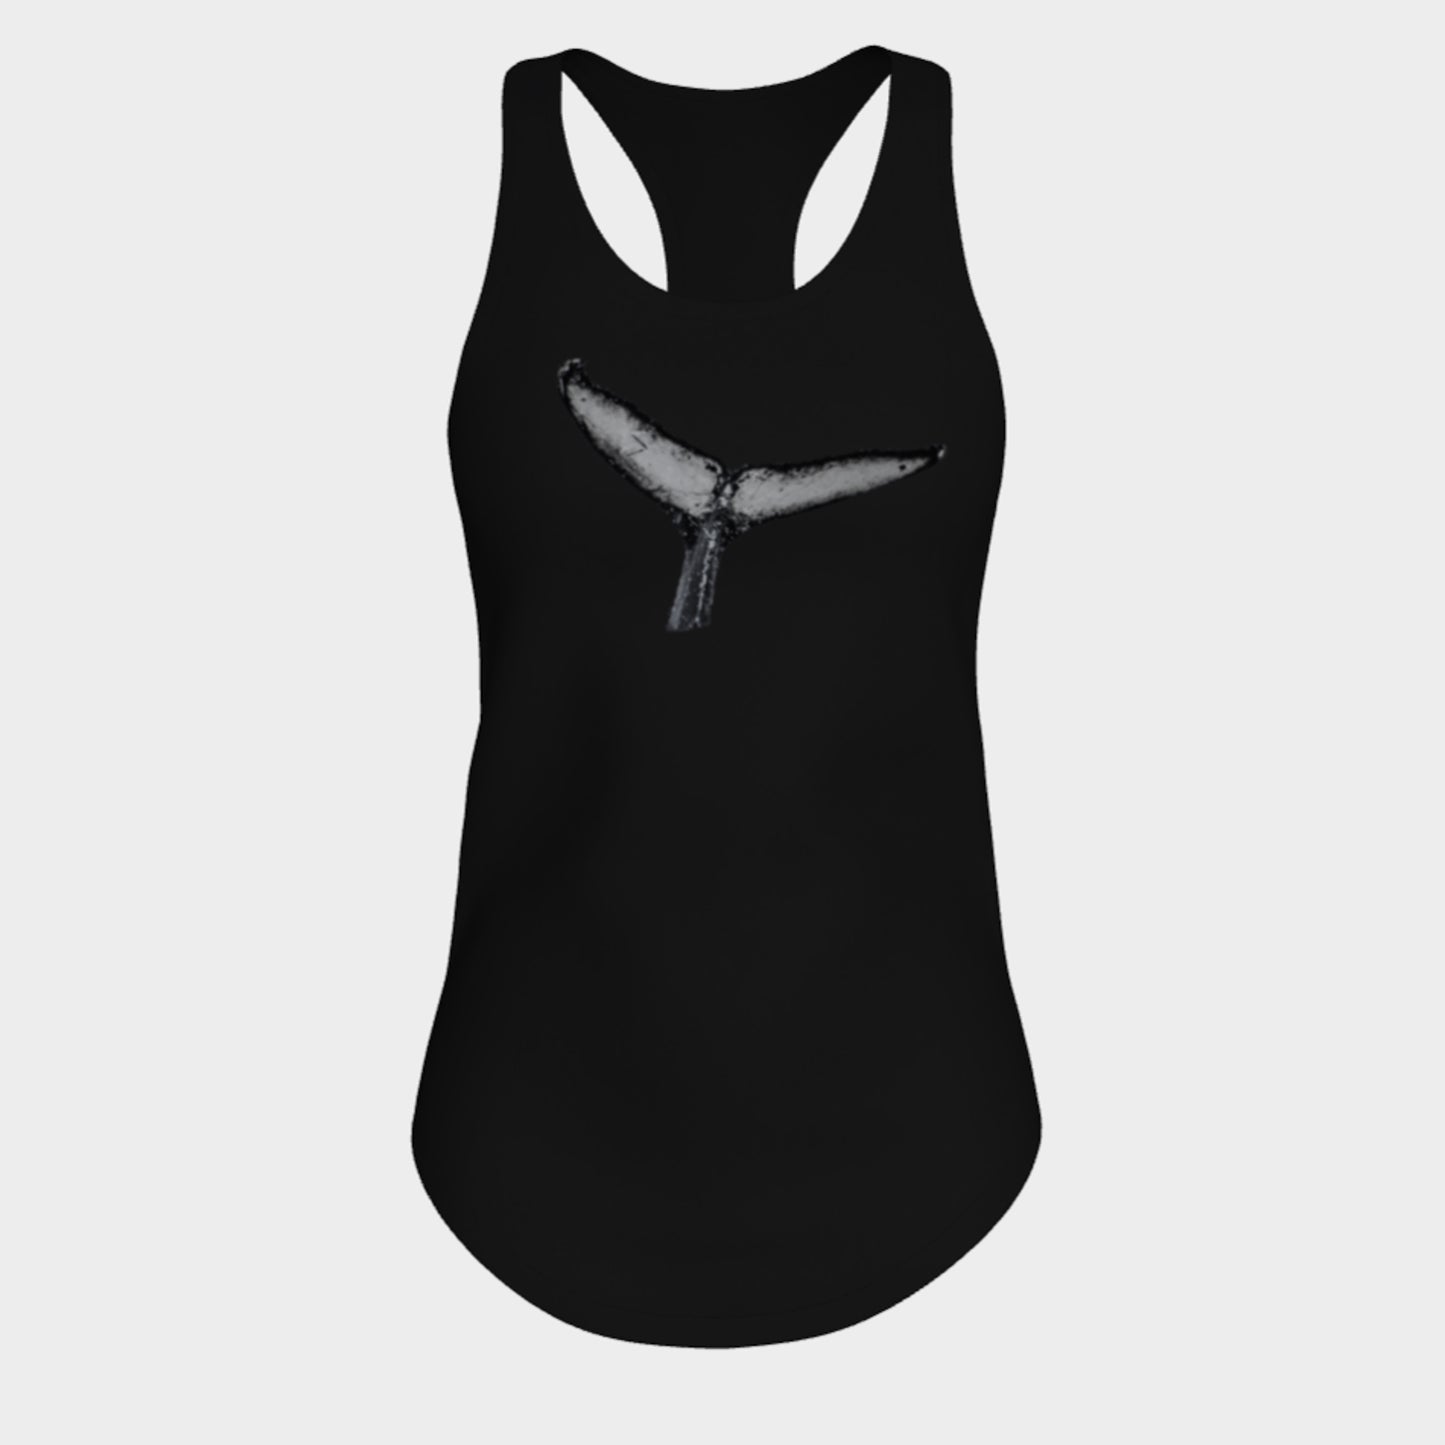 Humpback Whale Tail Racerback Tank Top  Excellent choice for the summer or for working out. 